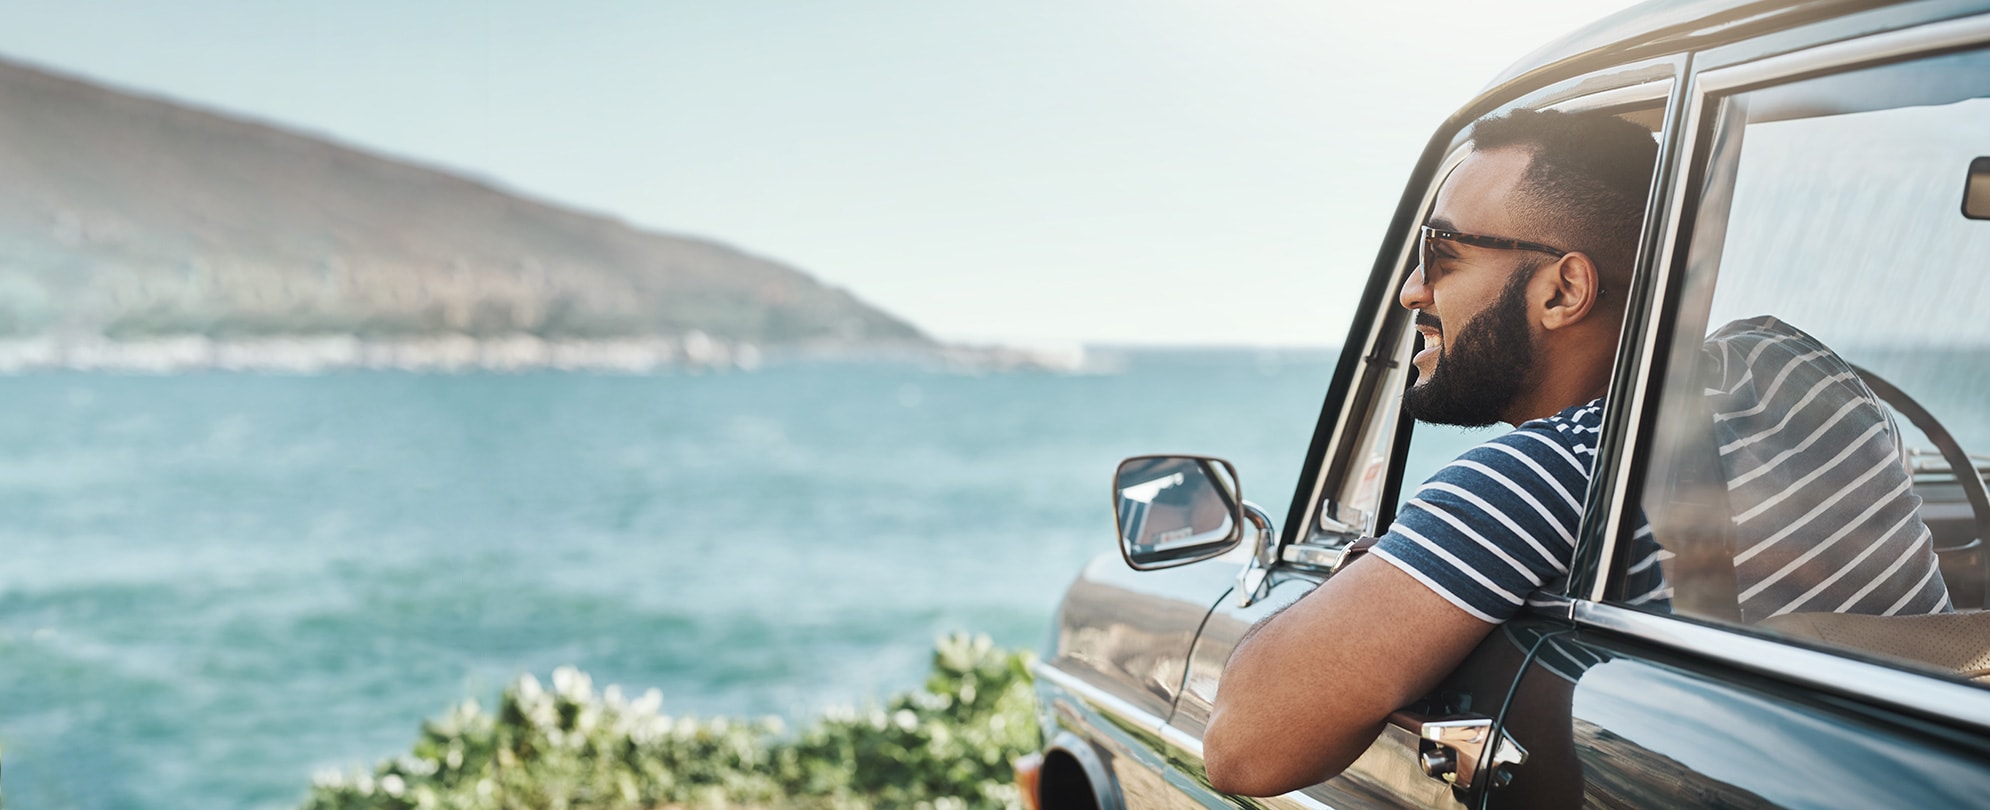 A man leans out the window of his car smiling as he looks out over the shore on a sunny day.